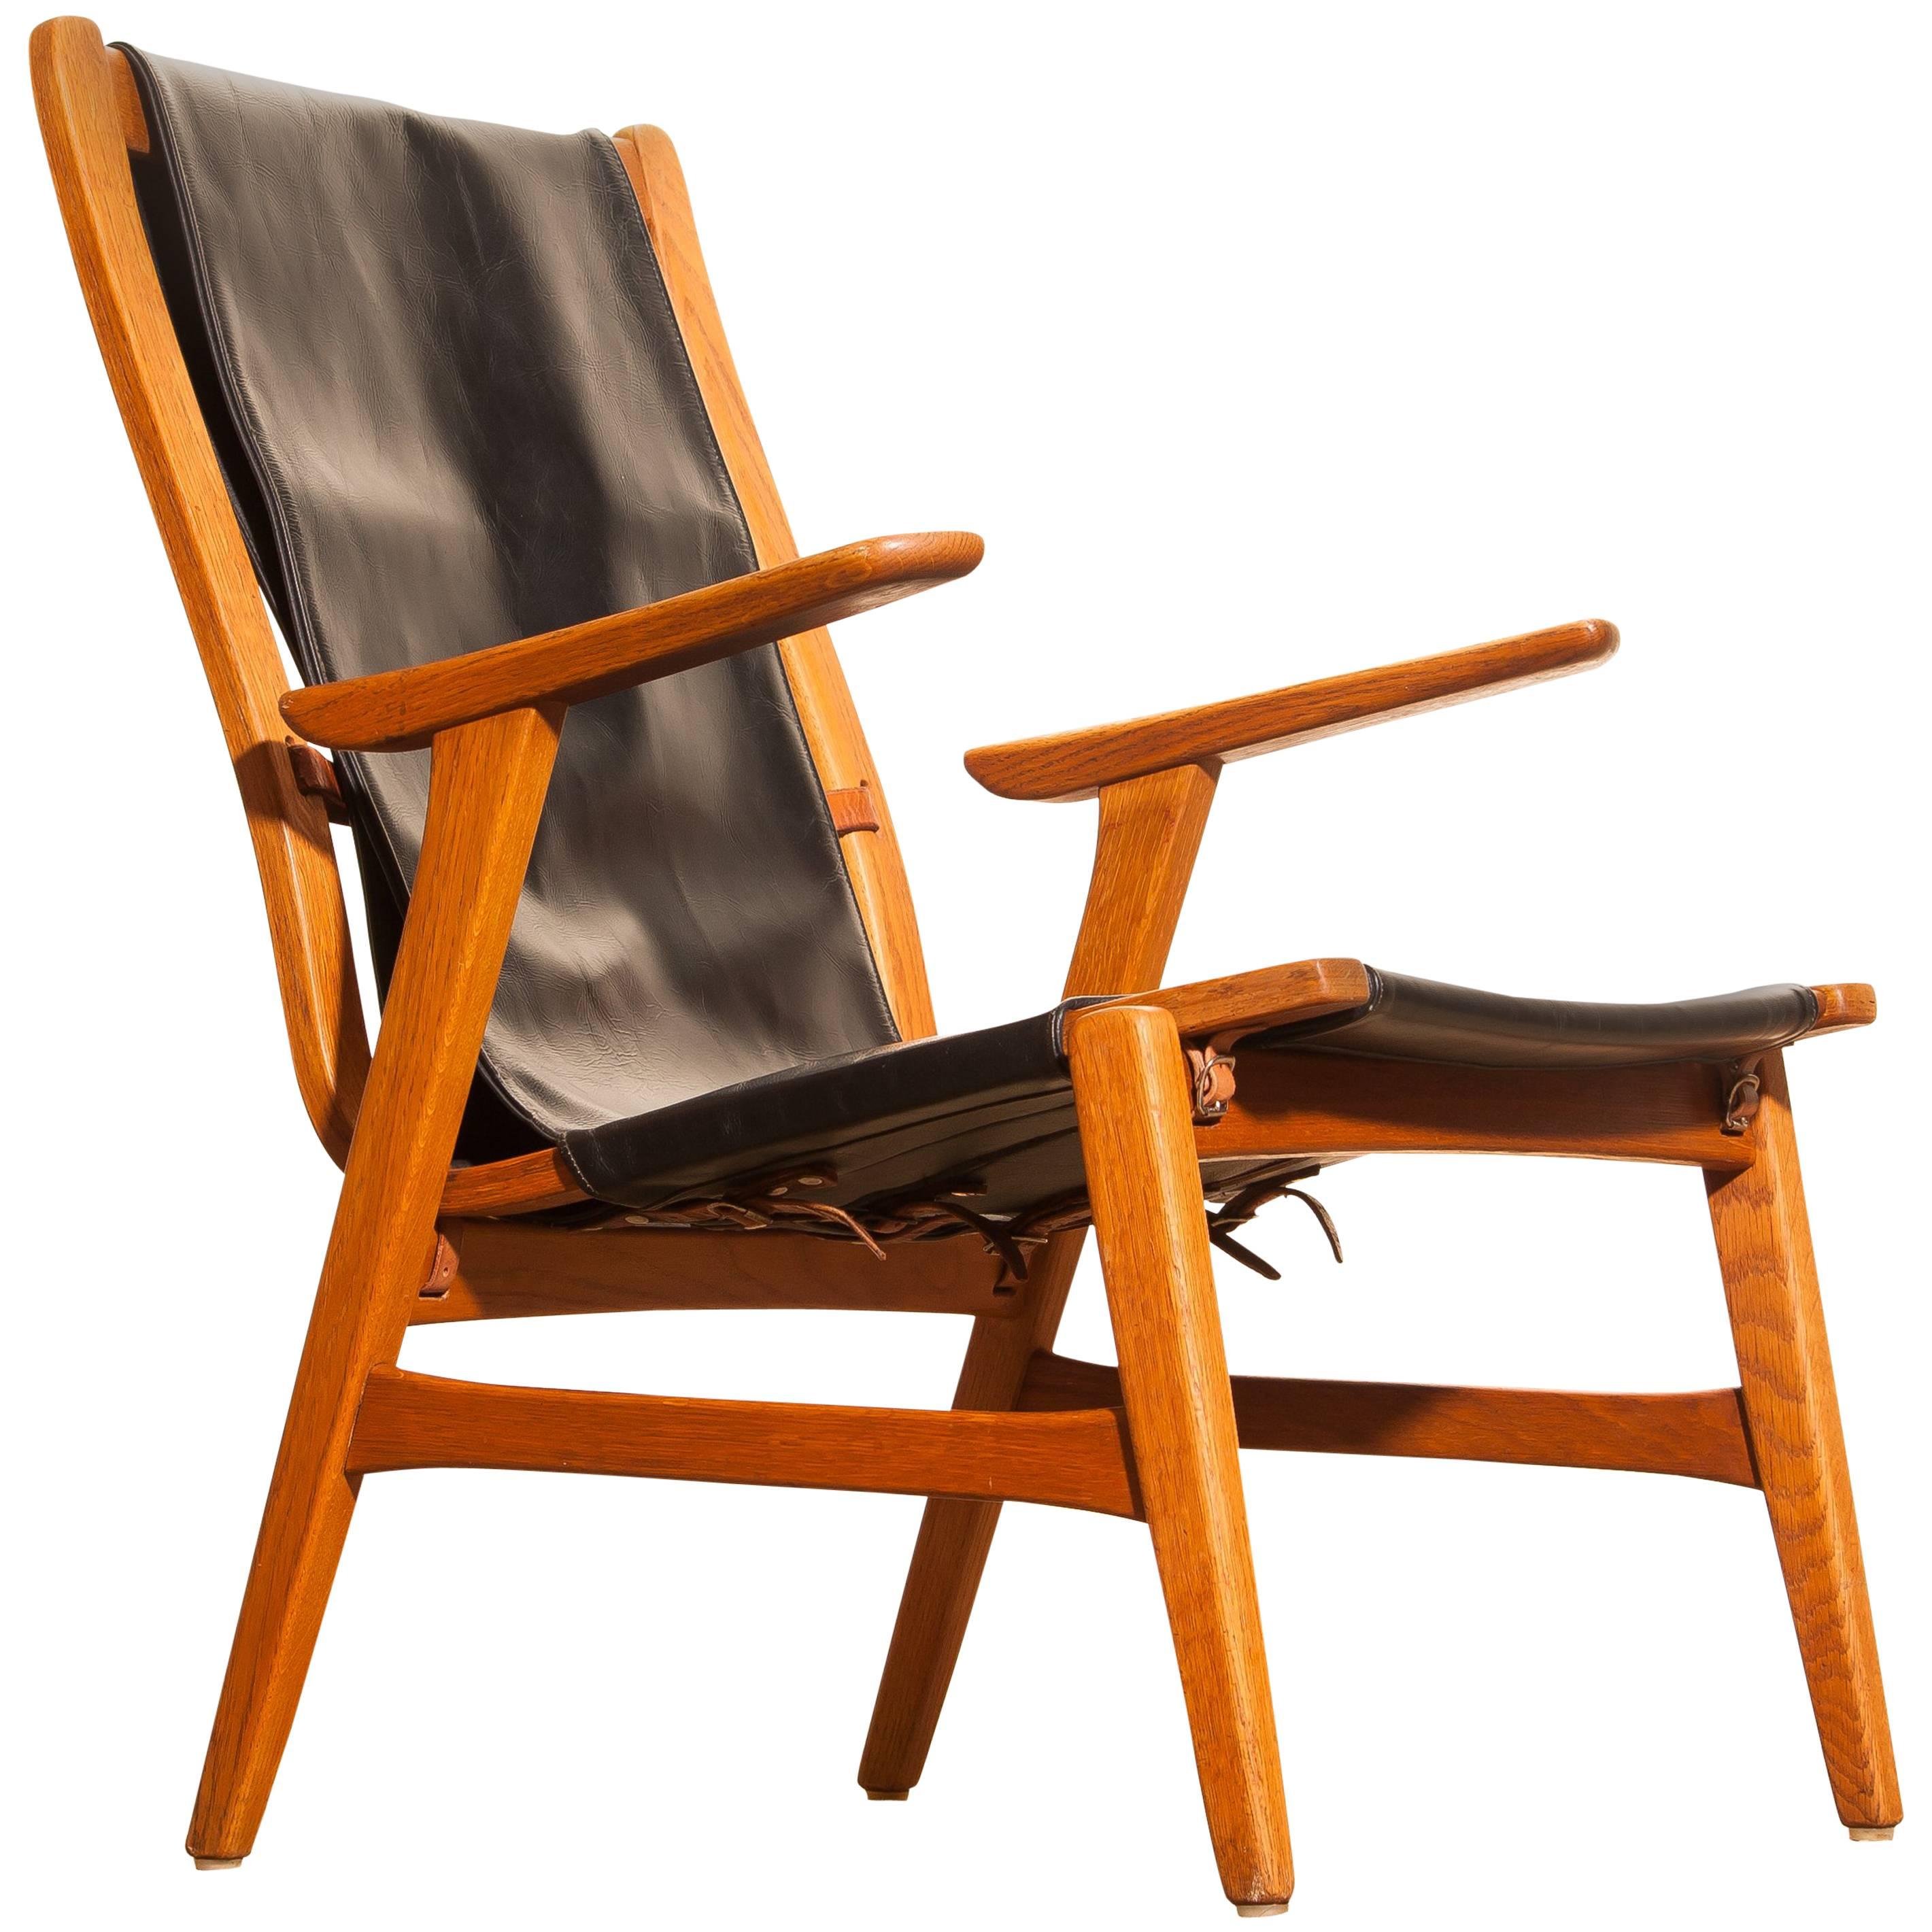 Wonderful hunting chair 'Ulrika' designed by Östen Kristansson for Vittsjö, Sweden.
This beautiful chair is made of an oak frame with a black leather seating.
It is in a very nice condition.
Period 1950s.
Dimensions: H 82 cm, W 62 cm, D 60 cm,